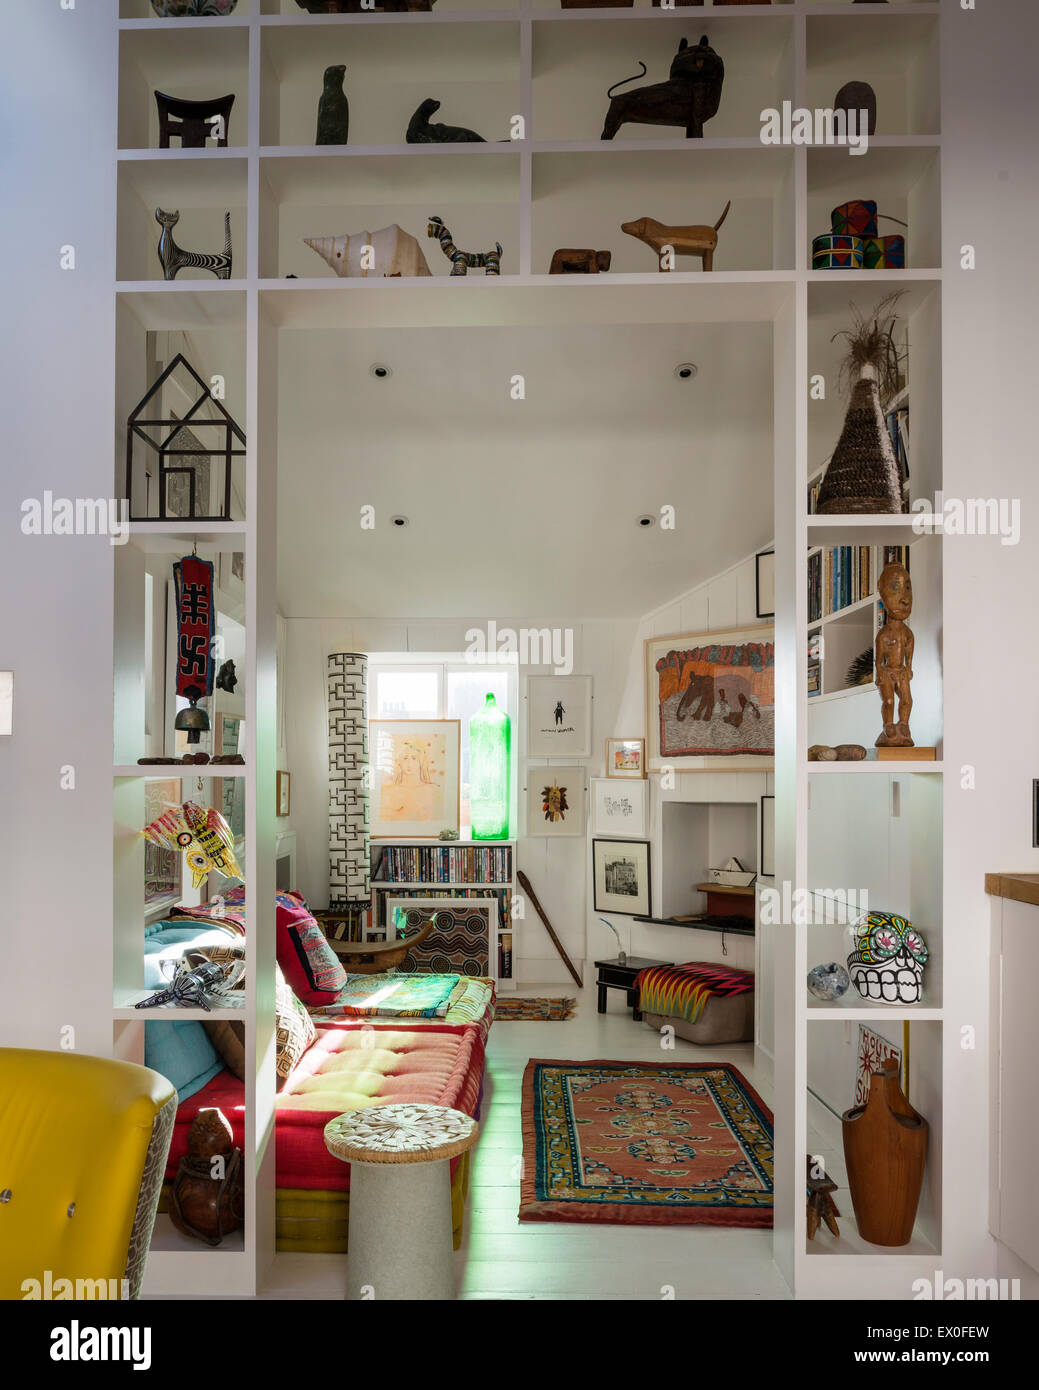 Small sculptures and artefacts on open shelving in room with uzbek rug Stock Photo